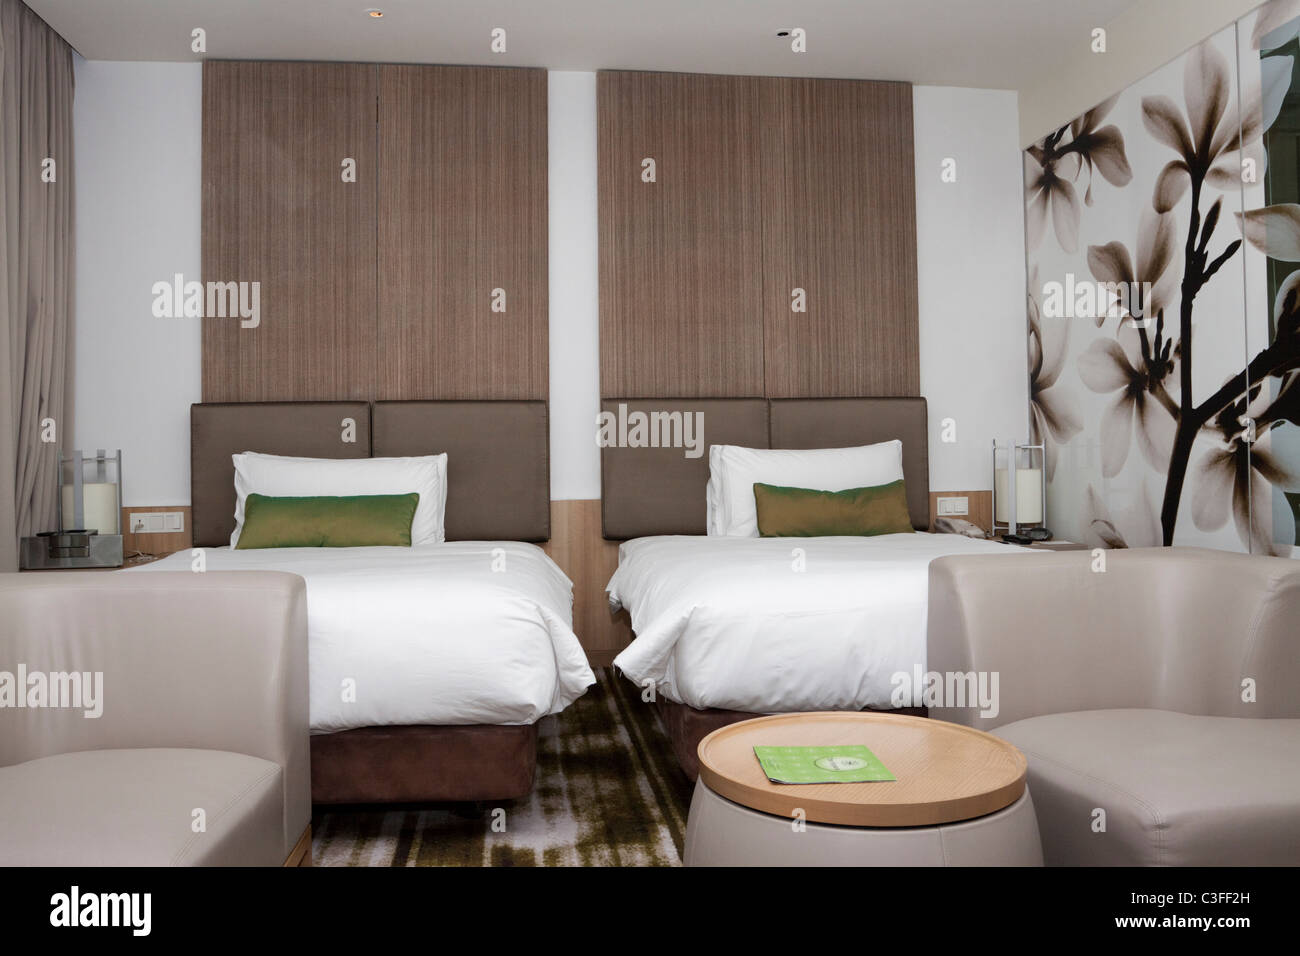 Twin beds in a hotel room, Crowne Plaza, Changi Airport, Singapore Stock Photo